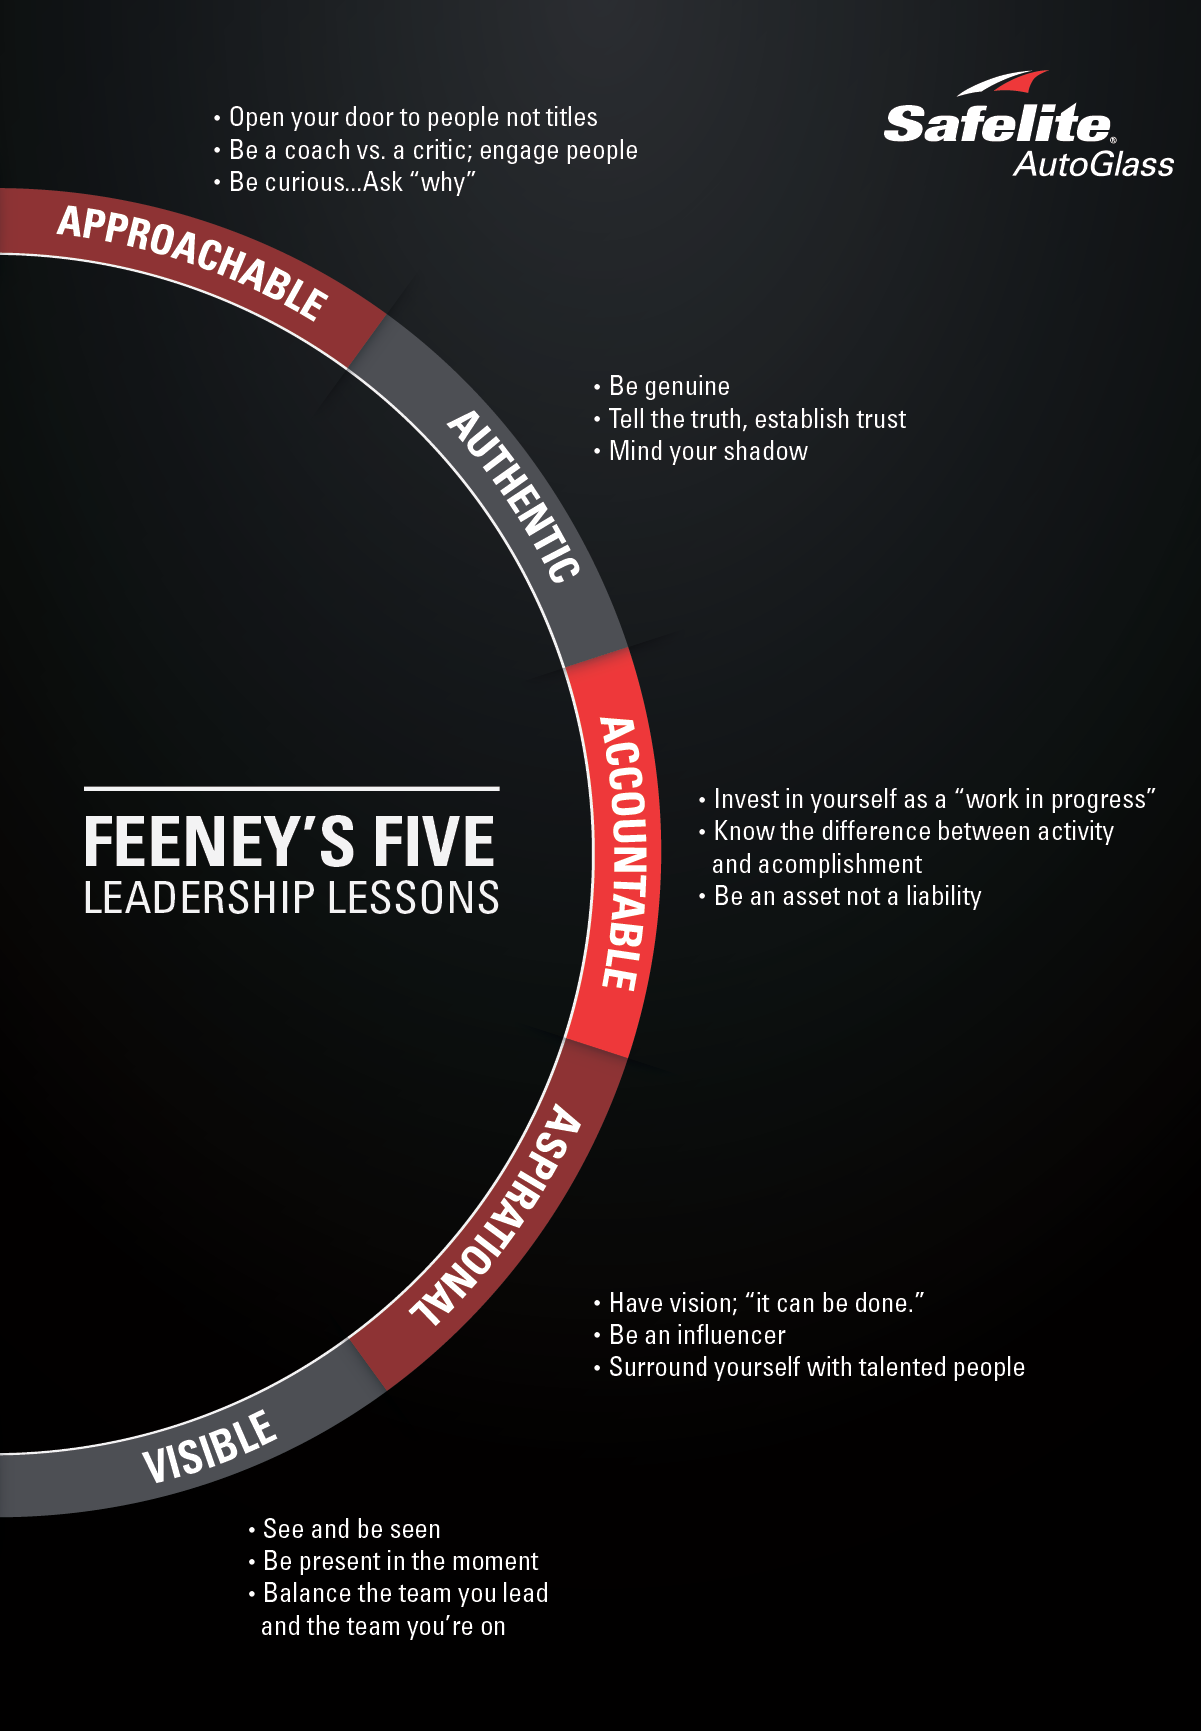 This infographic highlights the four As and one V of Tom Feeney's Five Leadership Lessons.